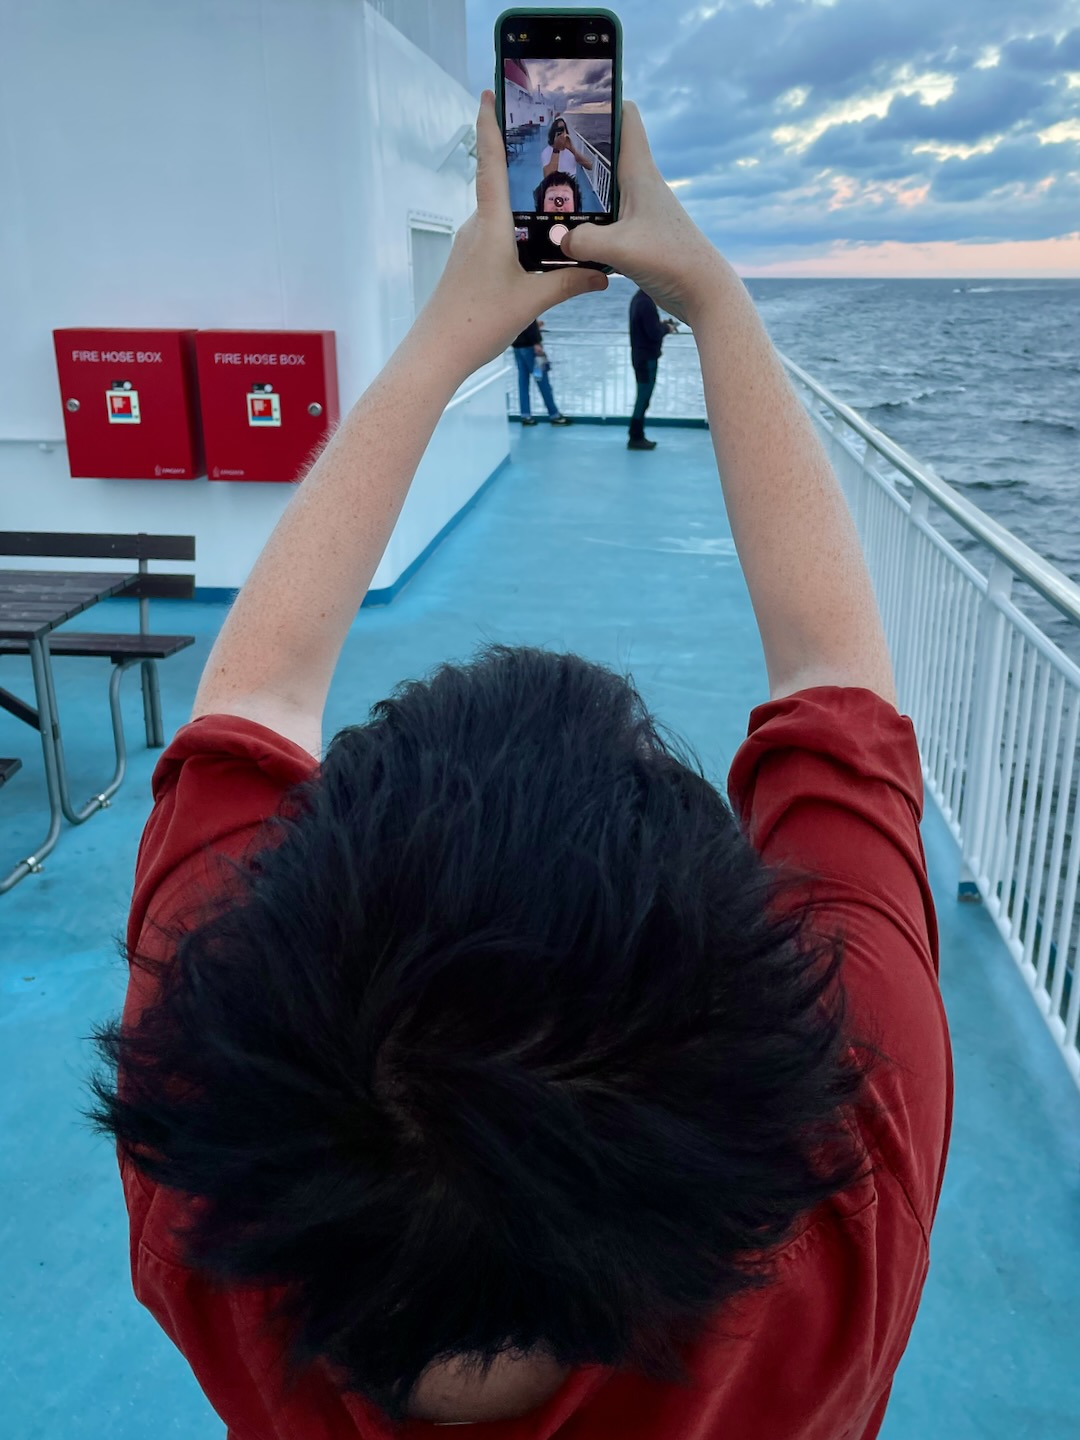 A woman standing on the deck of a ferry, taking a selfie with her phone. The camera app preview shows a man standing right behind her, taking a photo of her taking a photo of both of them.